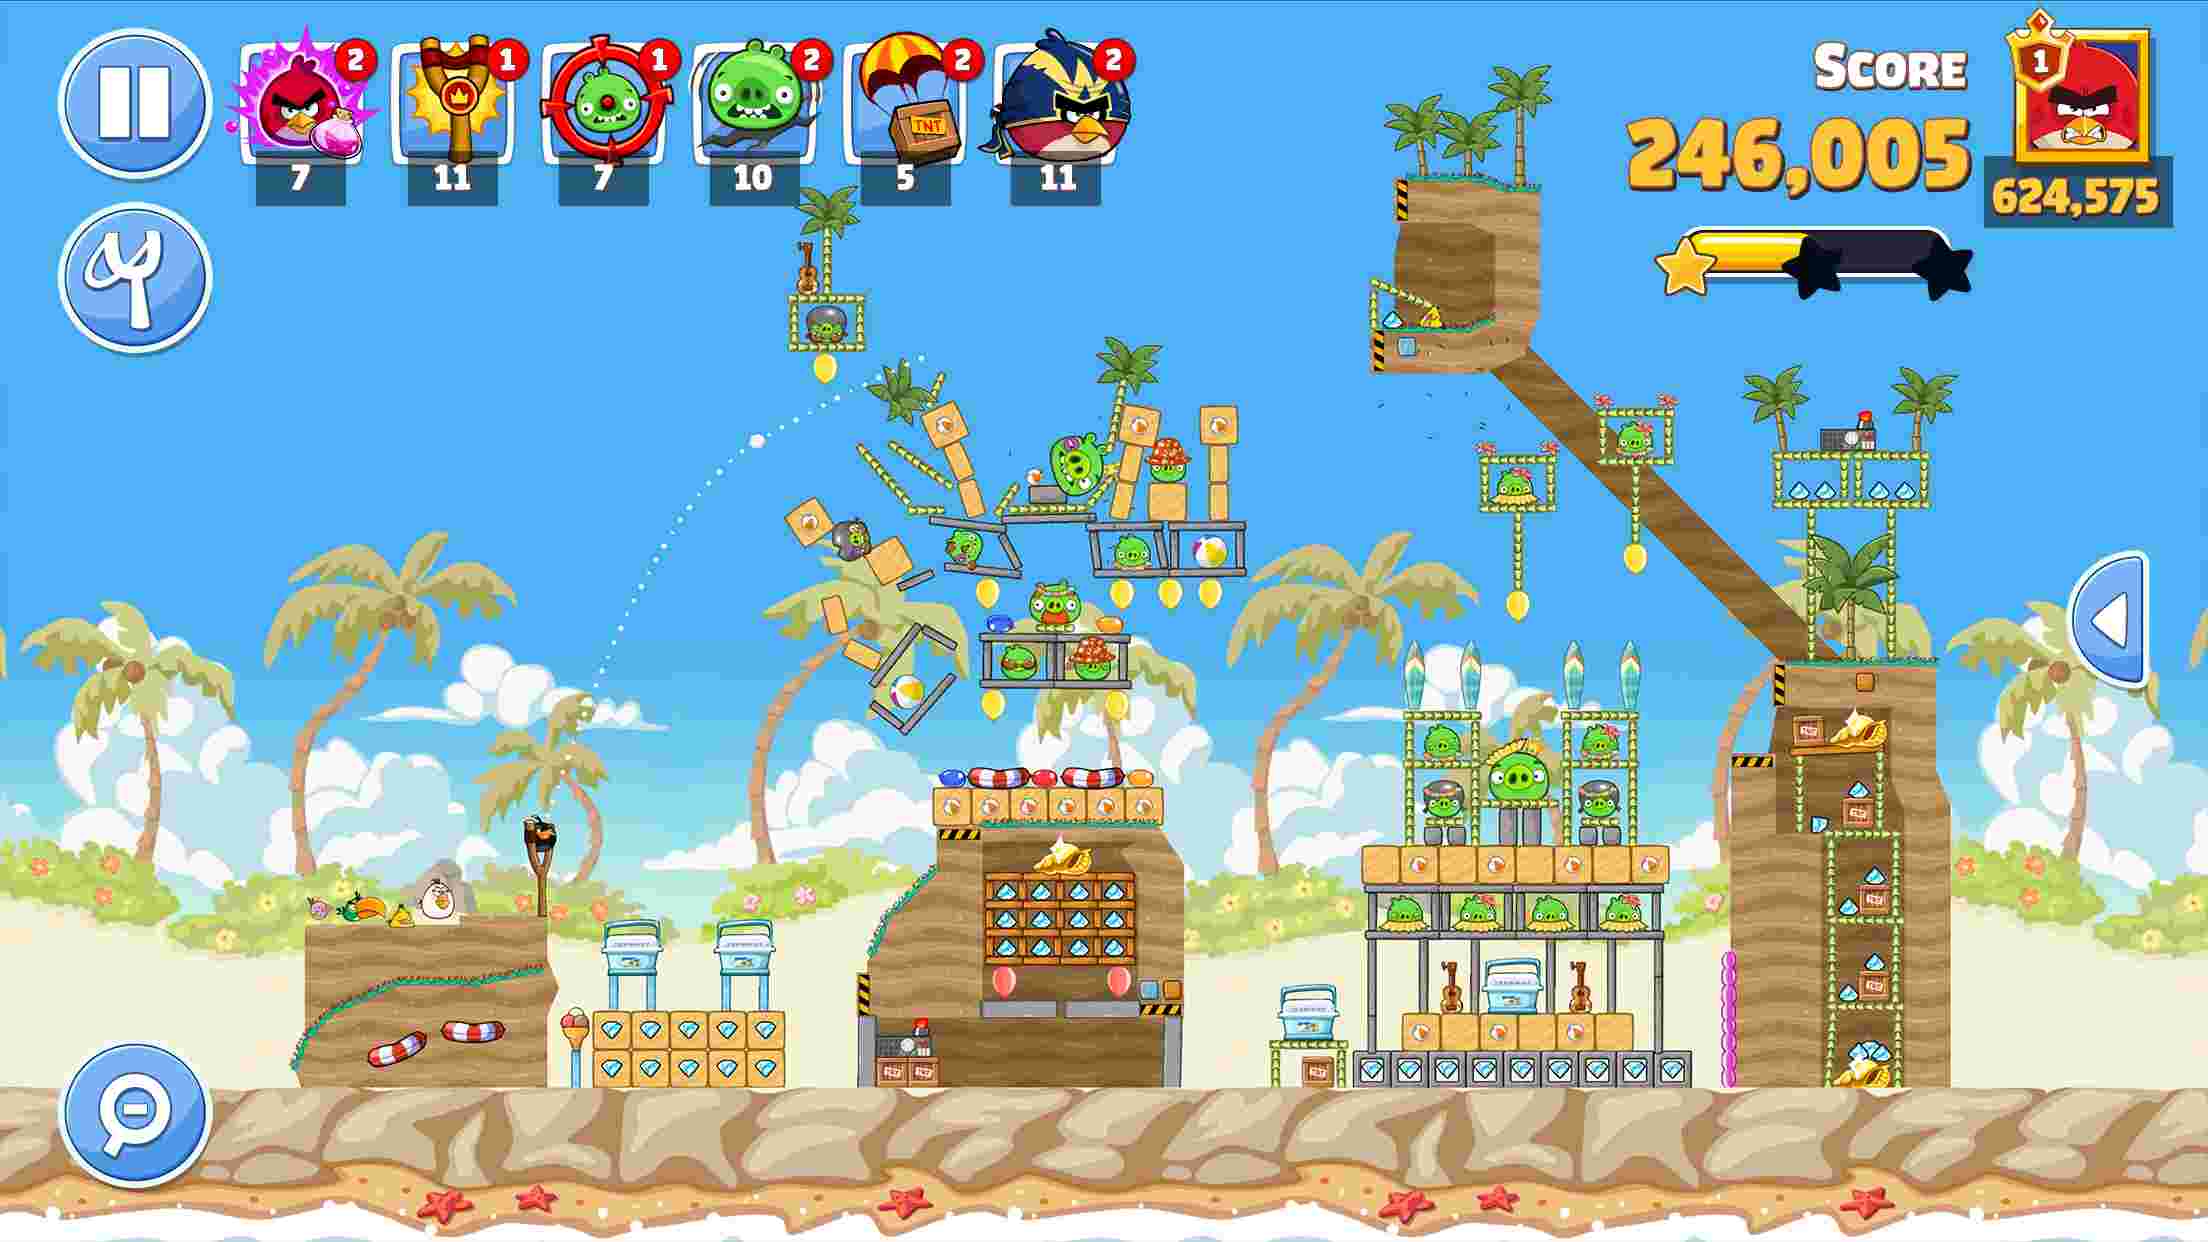 Download Angry Birds Friends 